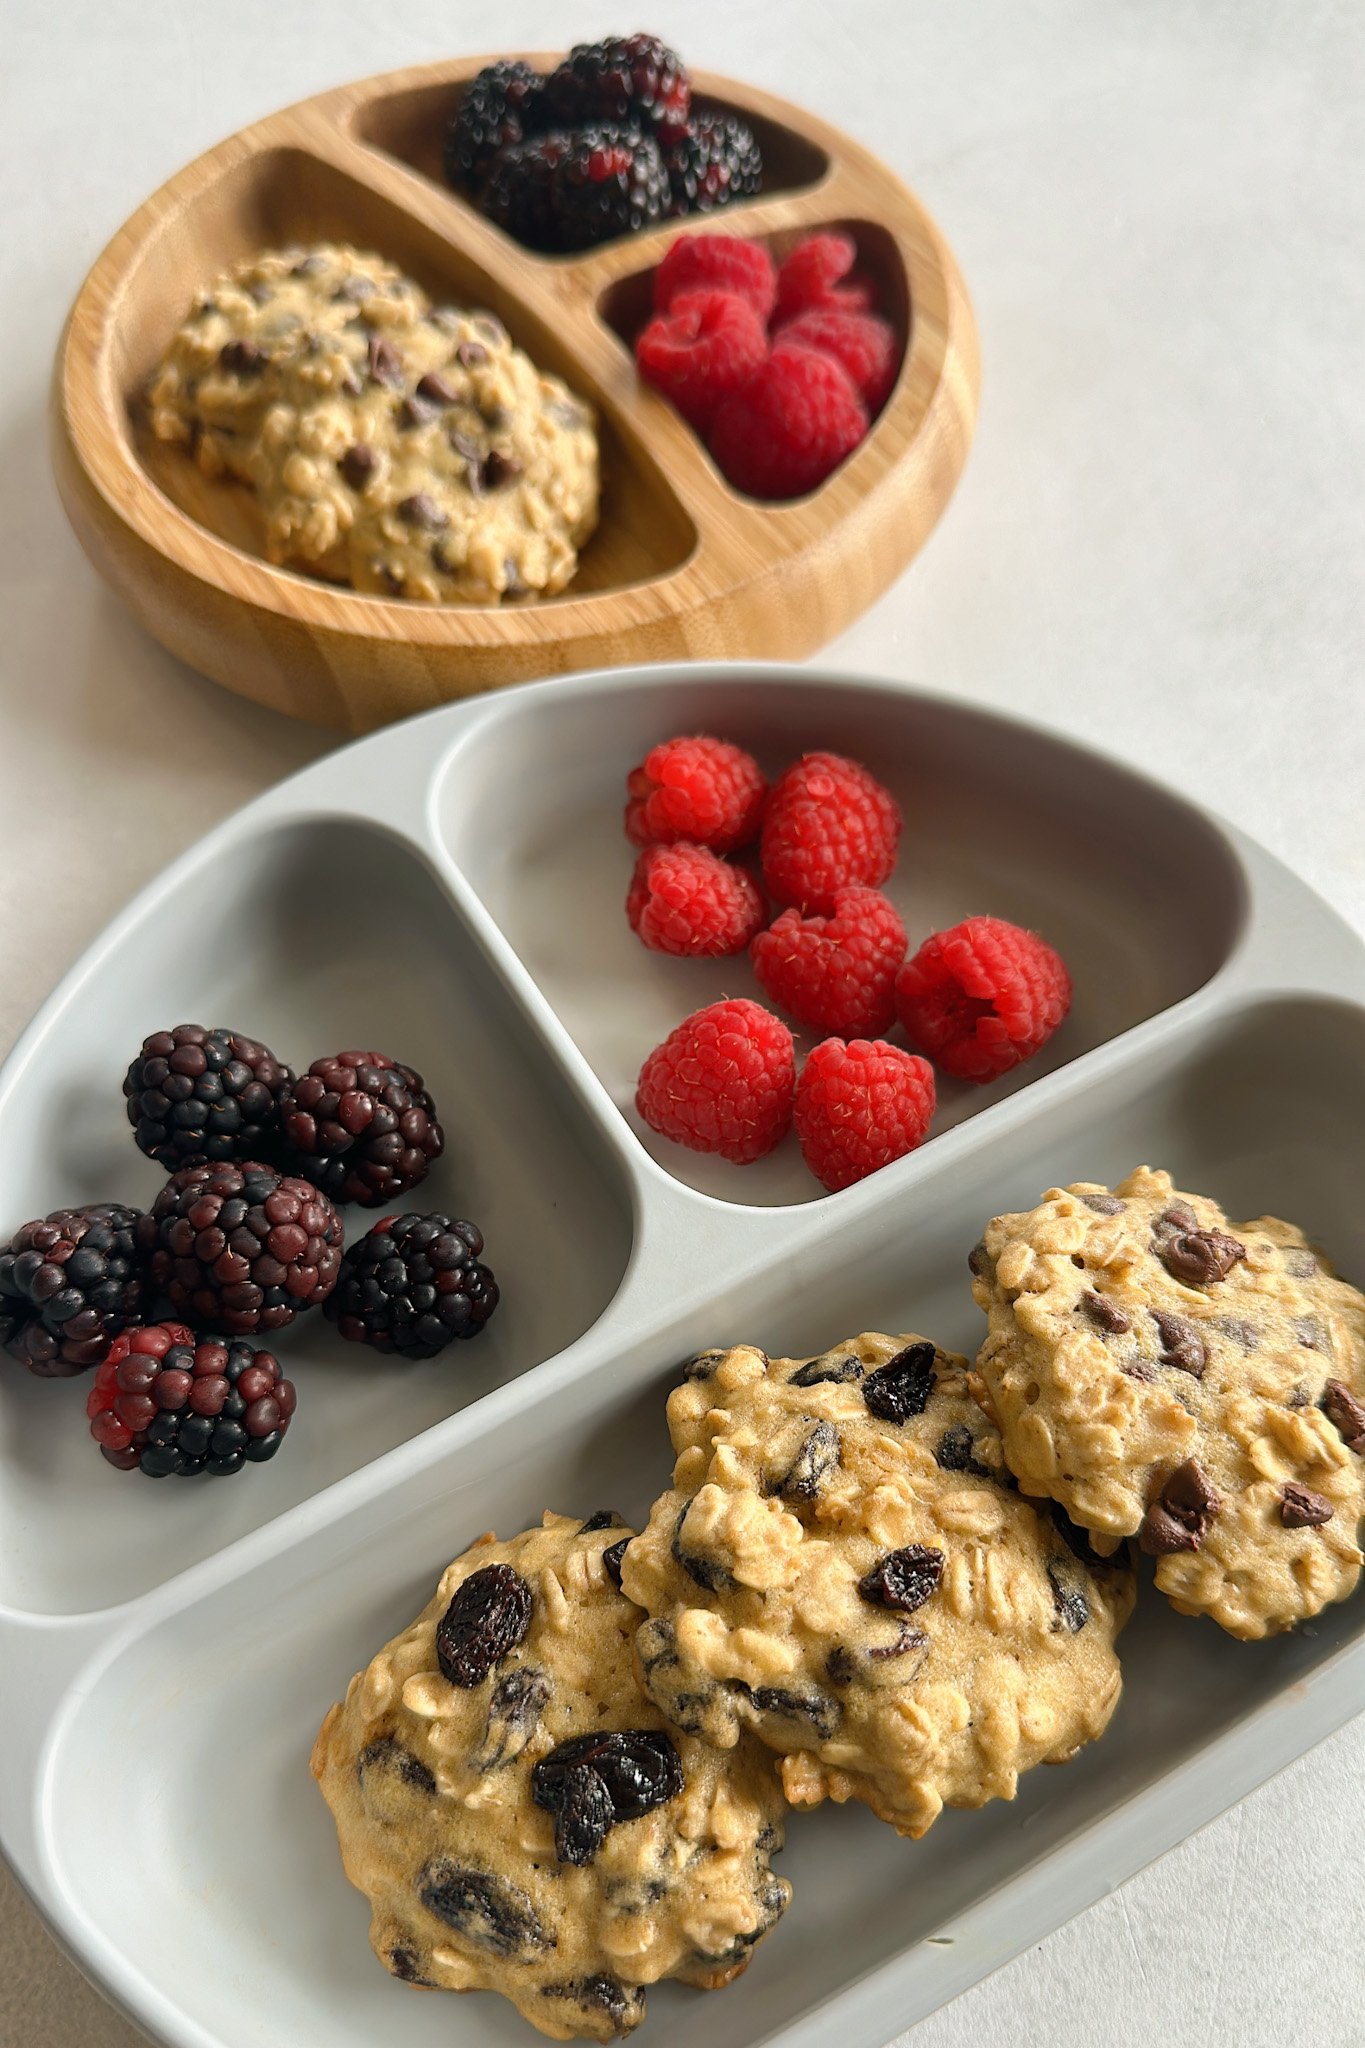 Maple oatmeal cookies served with berries.